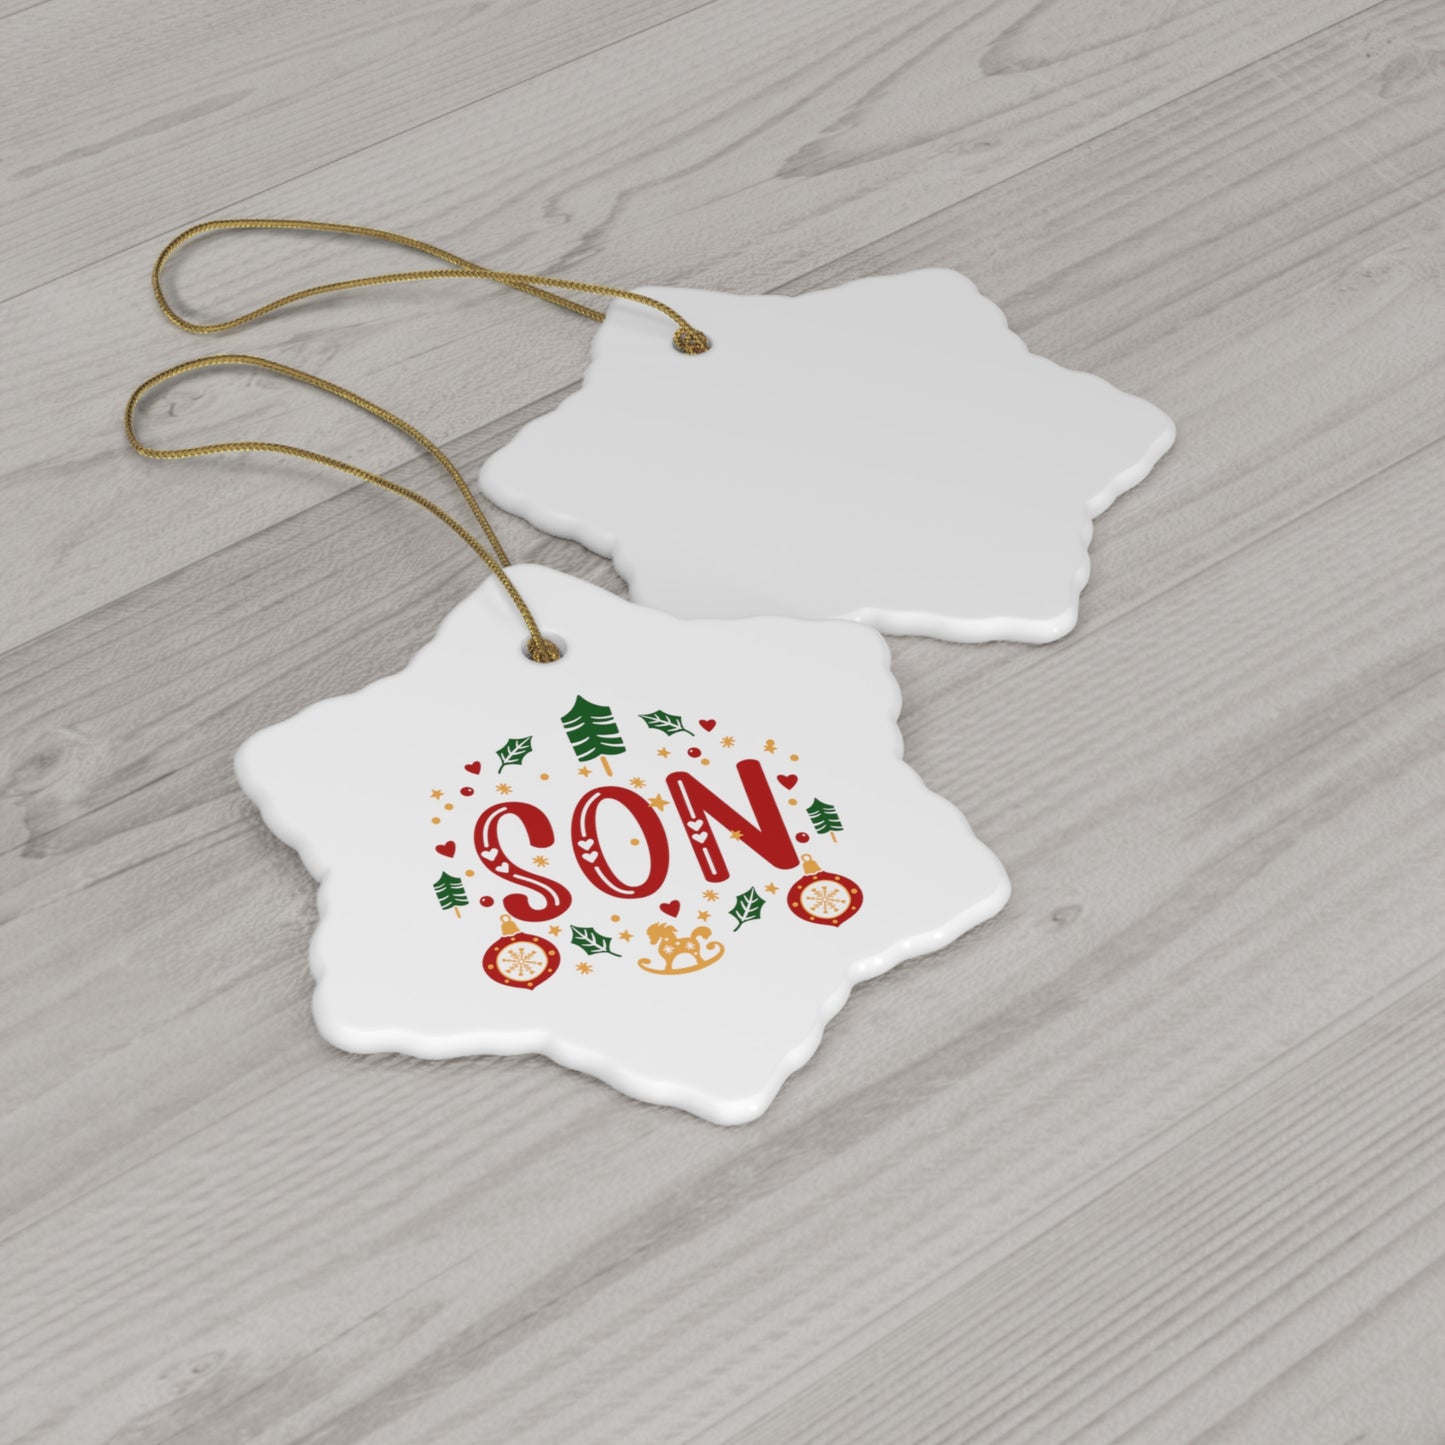 SON - Christmas Ceramic Ornament, Christmas Gifts, Christmas Party, 4 Shapes